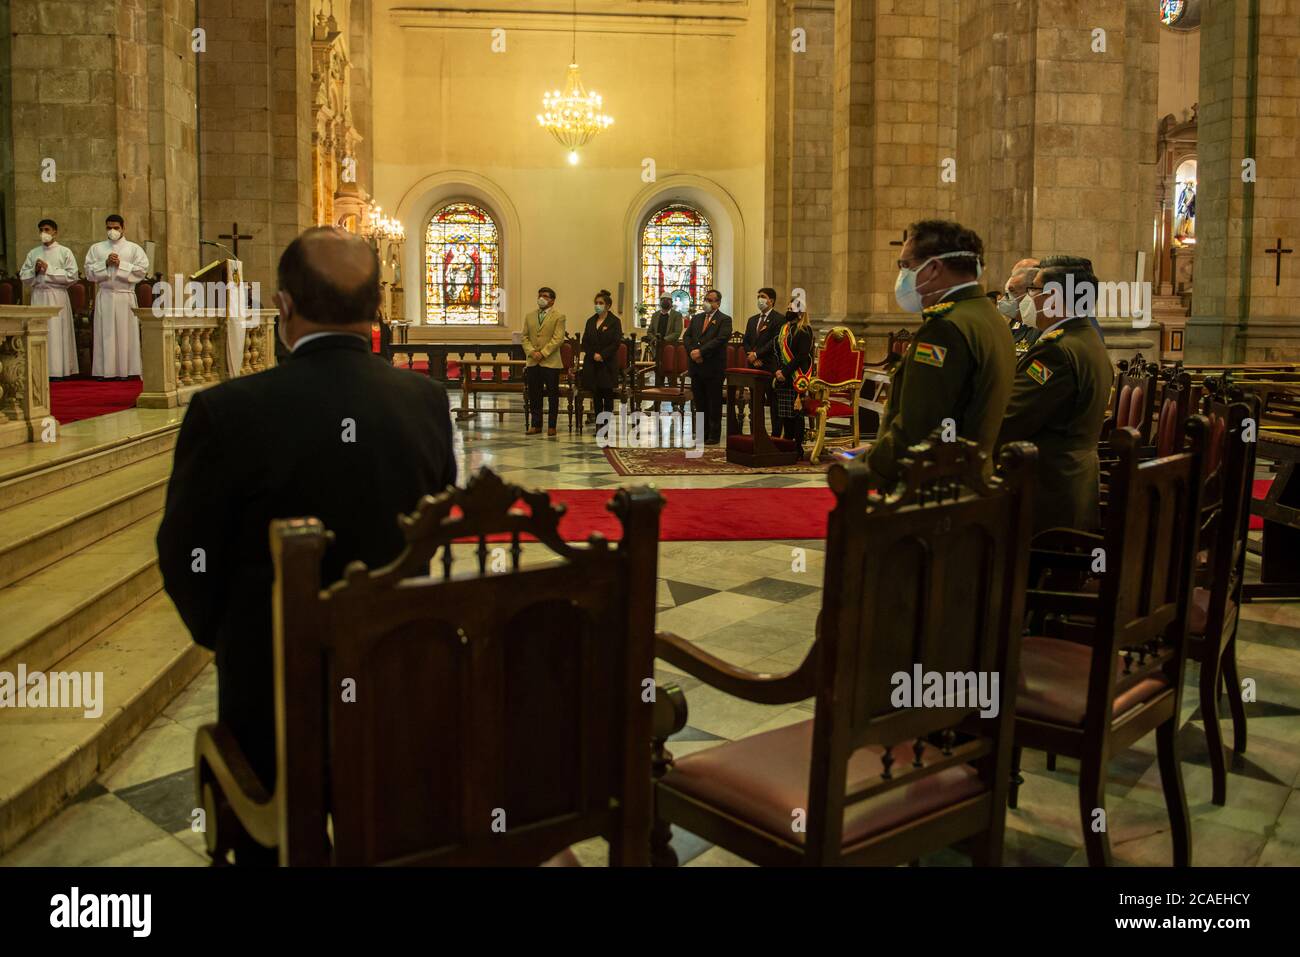 La Paz, Bolivia. 6th Aug 2020. Bolivia celebrated its 195th Independence Day while struggling with the COVID-19 pandemic and a severe political crisis. Interim president Jeanine Añez participated with several high ranking officials in a mass in the almost empty Cathedral of La Paz. Radoslaw Czajkowski/ Alamy Live News Stock Photo